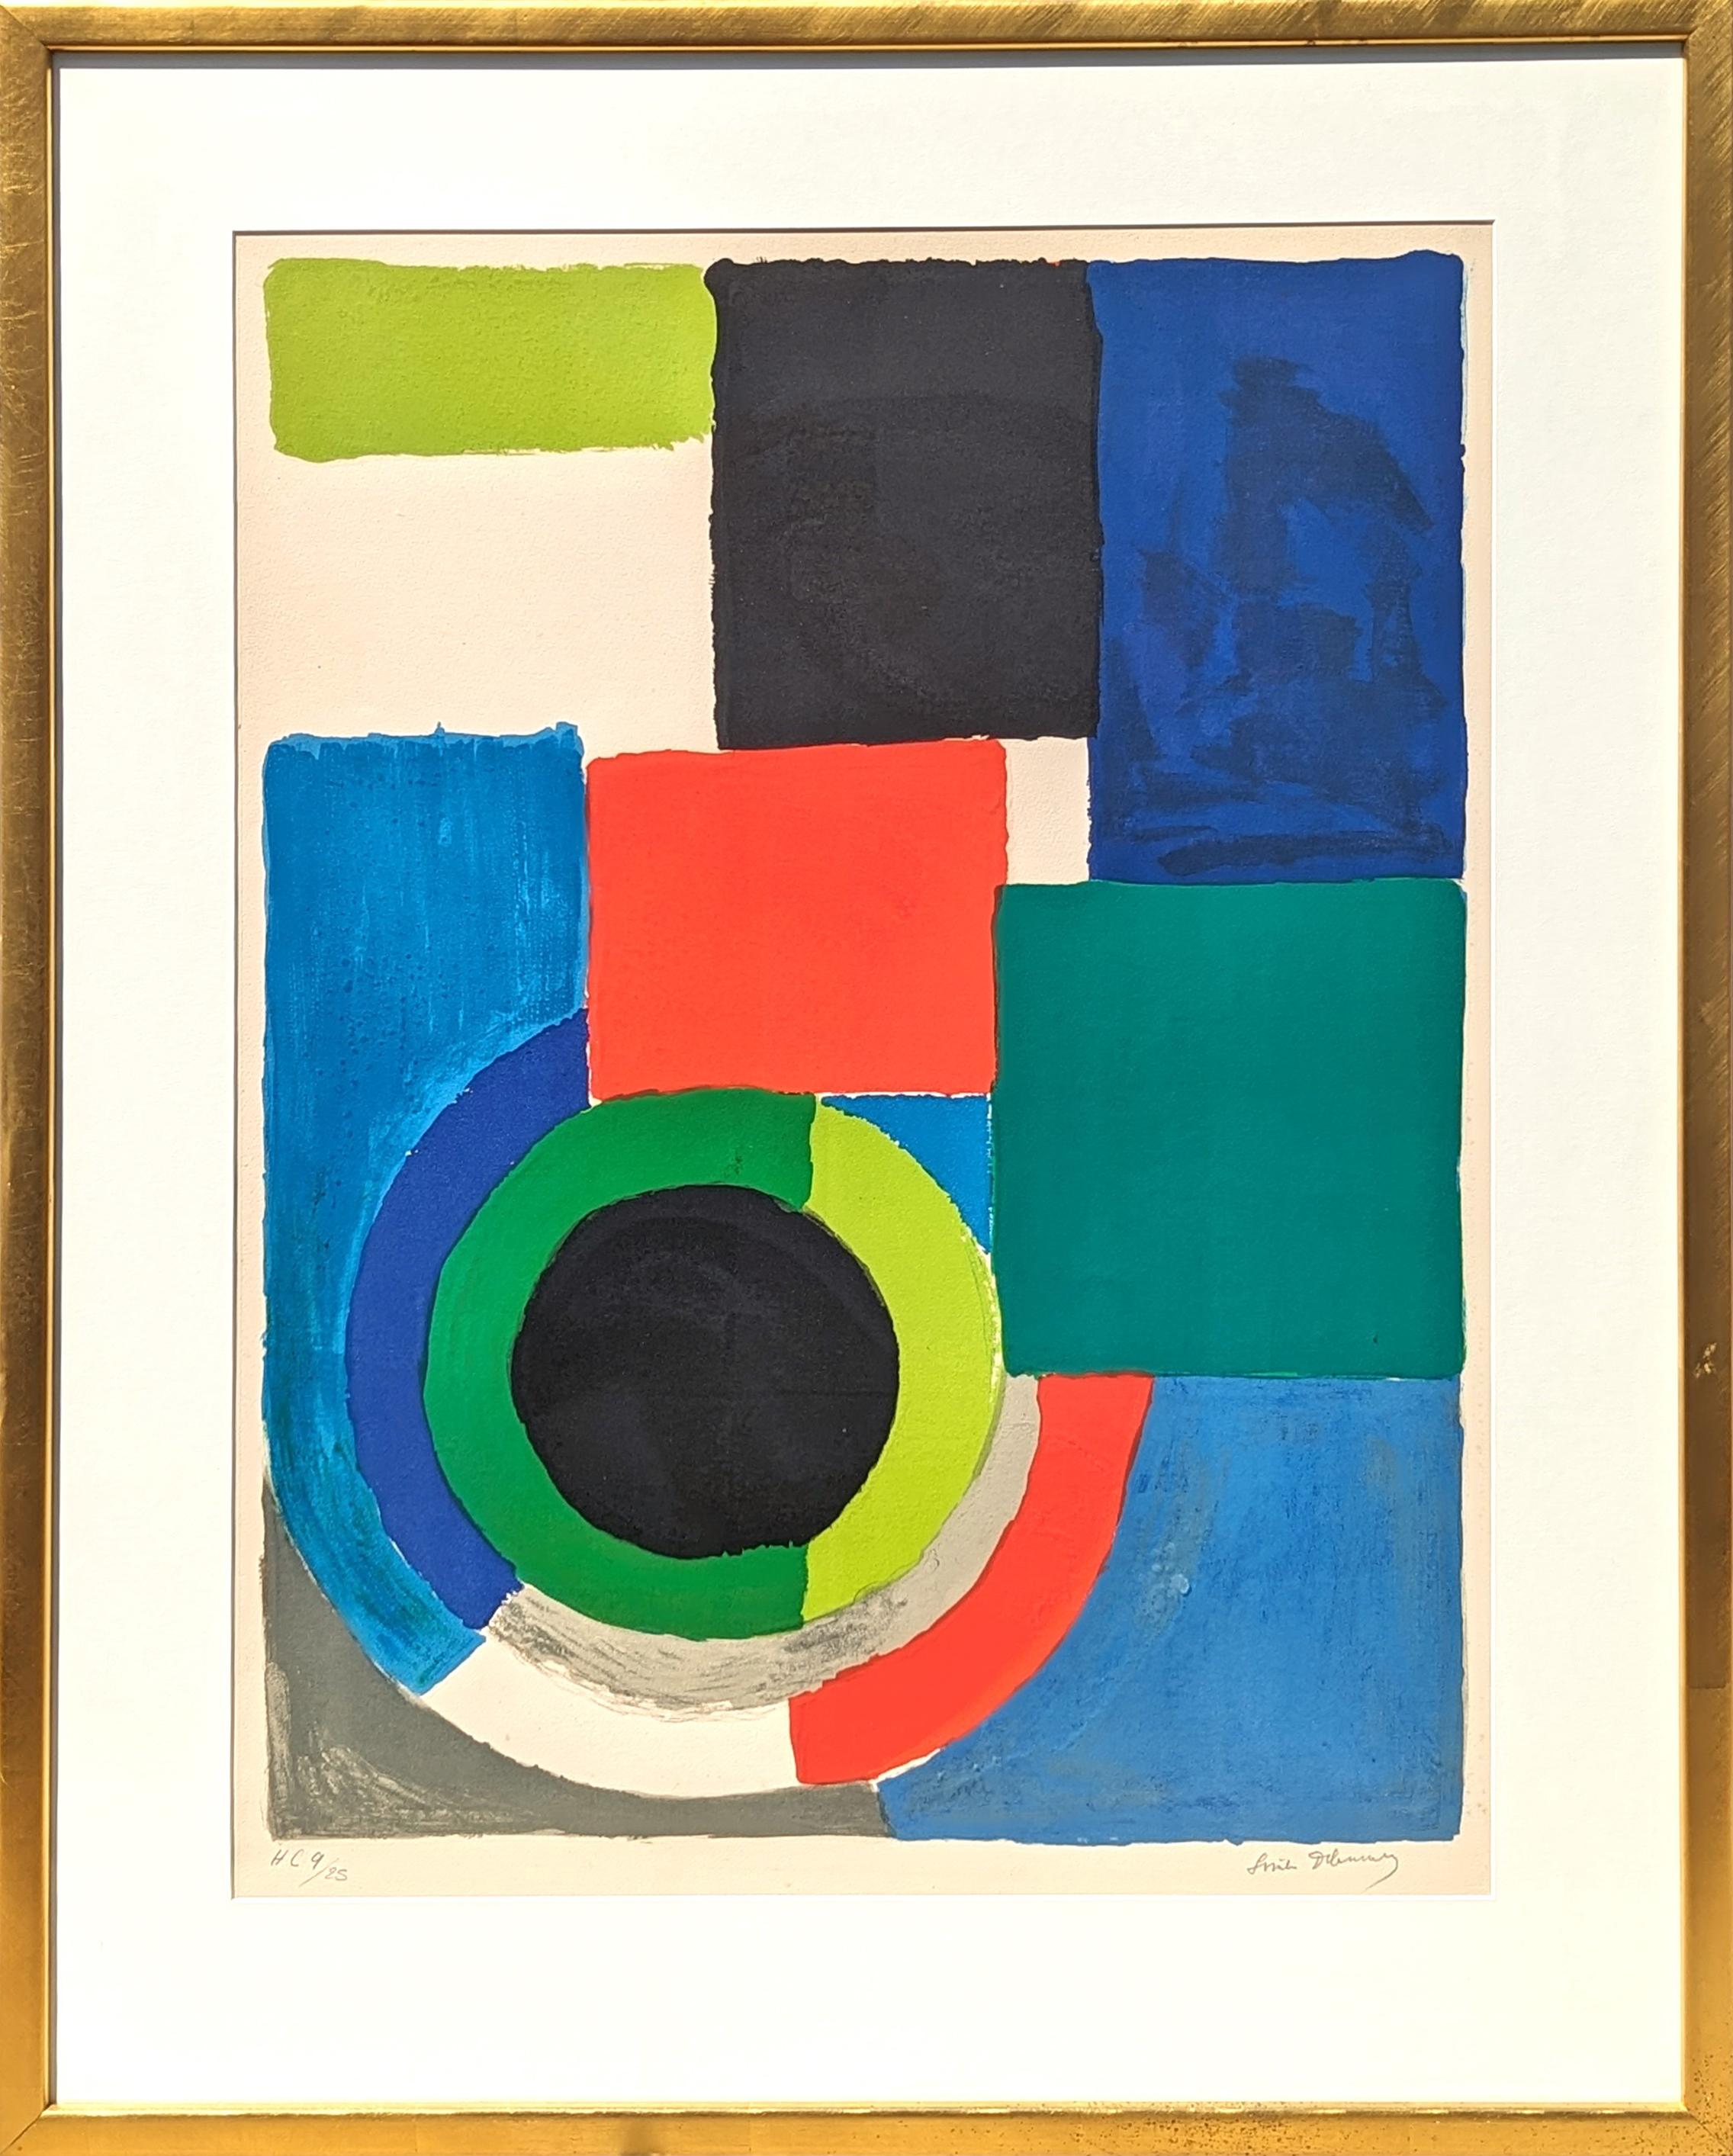 Sonia Delaunay Abstract Print – "Grand Carré Rouge" Moderne Geometrische Abstrakte Orphik Lithographie Edition Modern 9/25